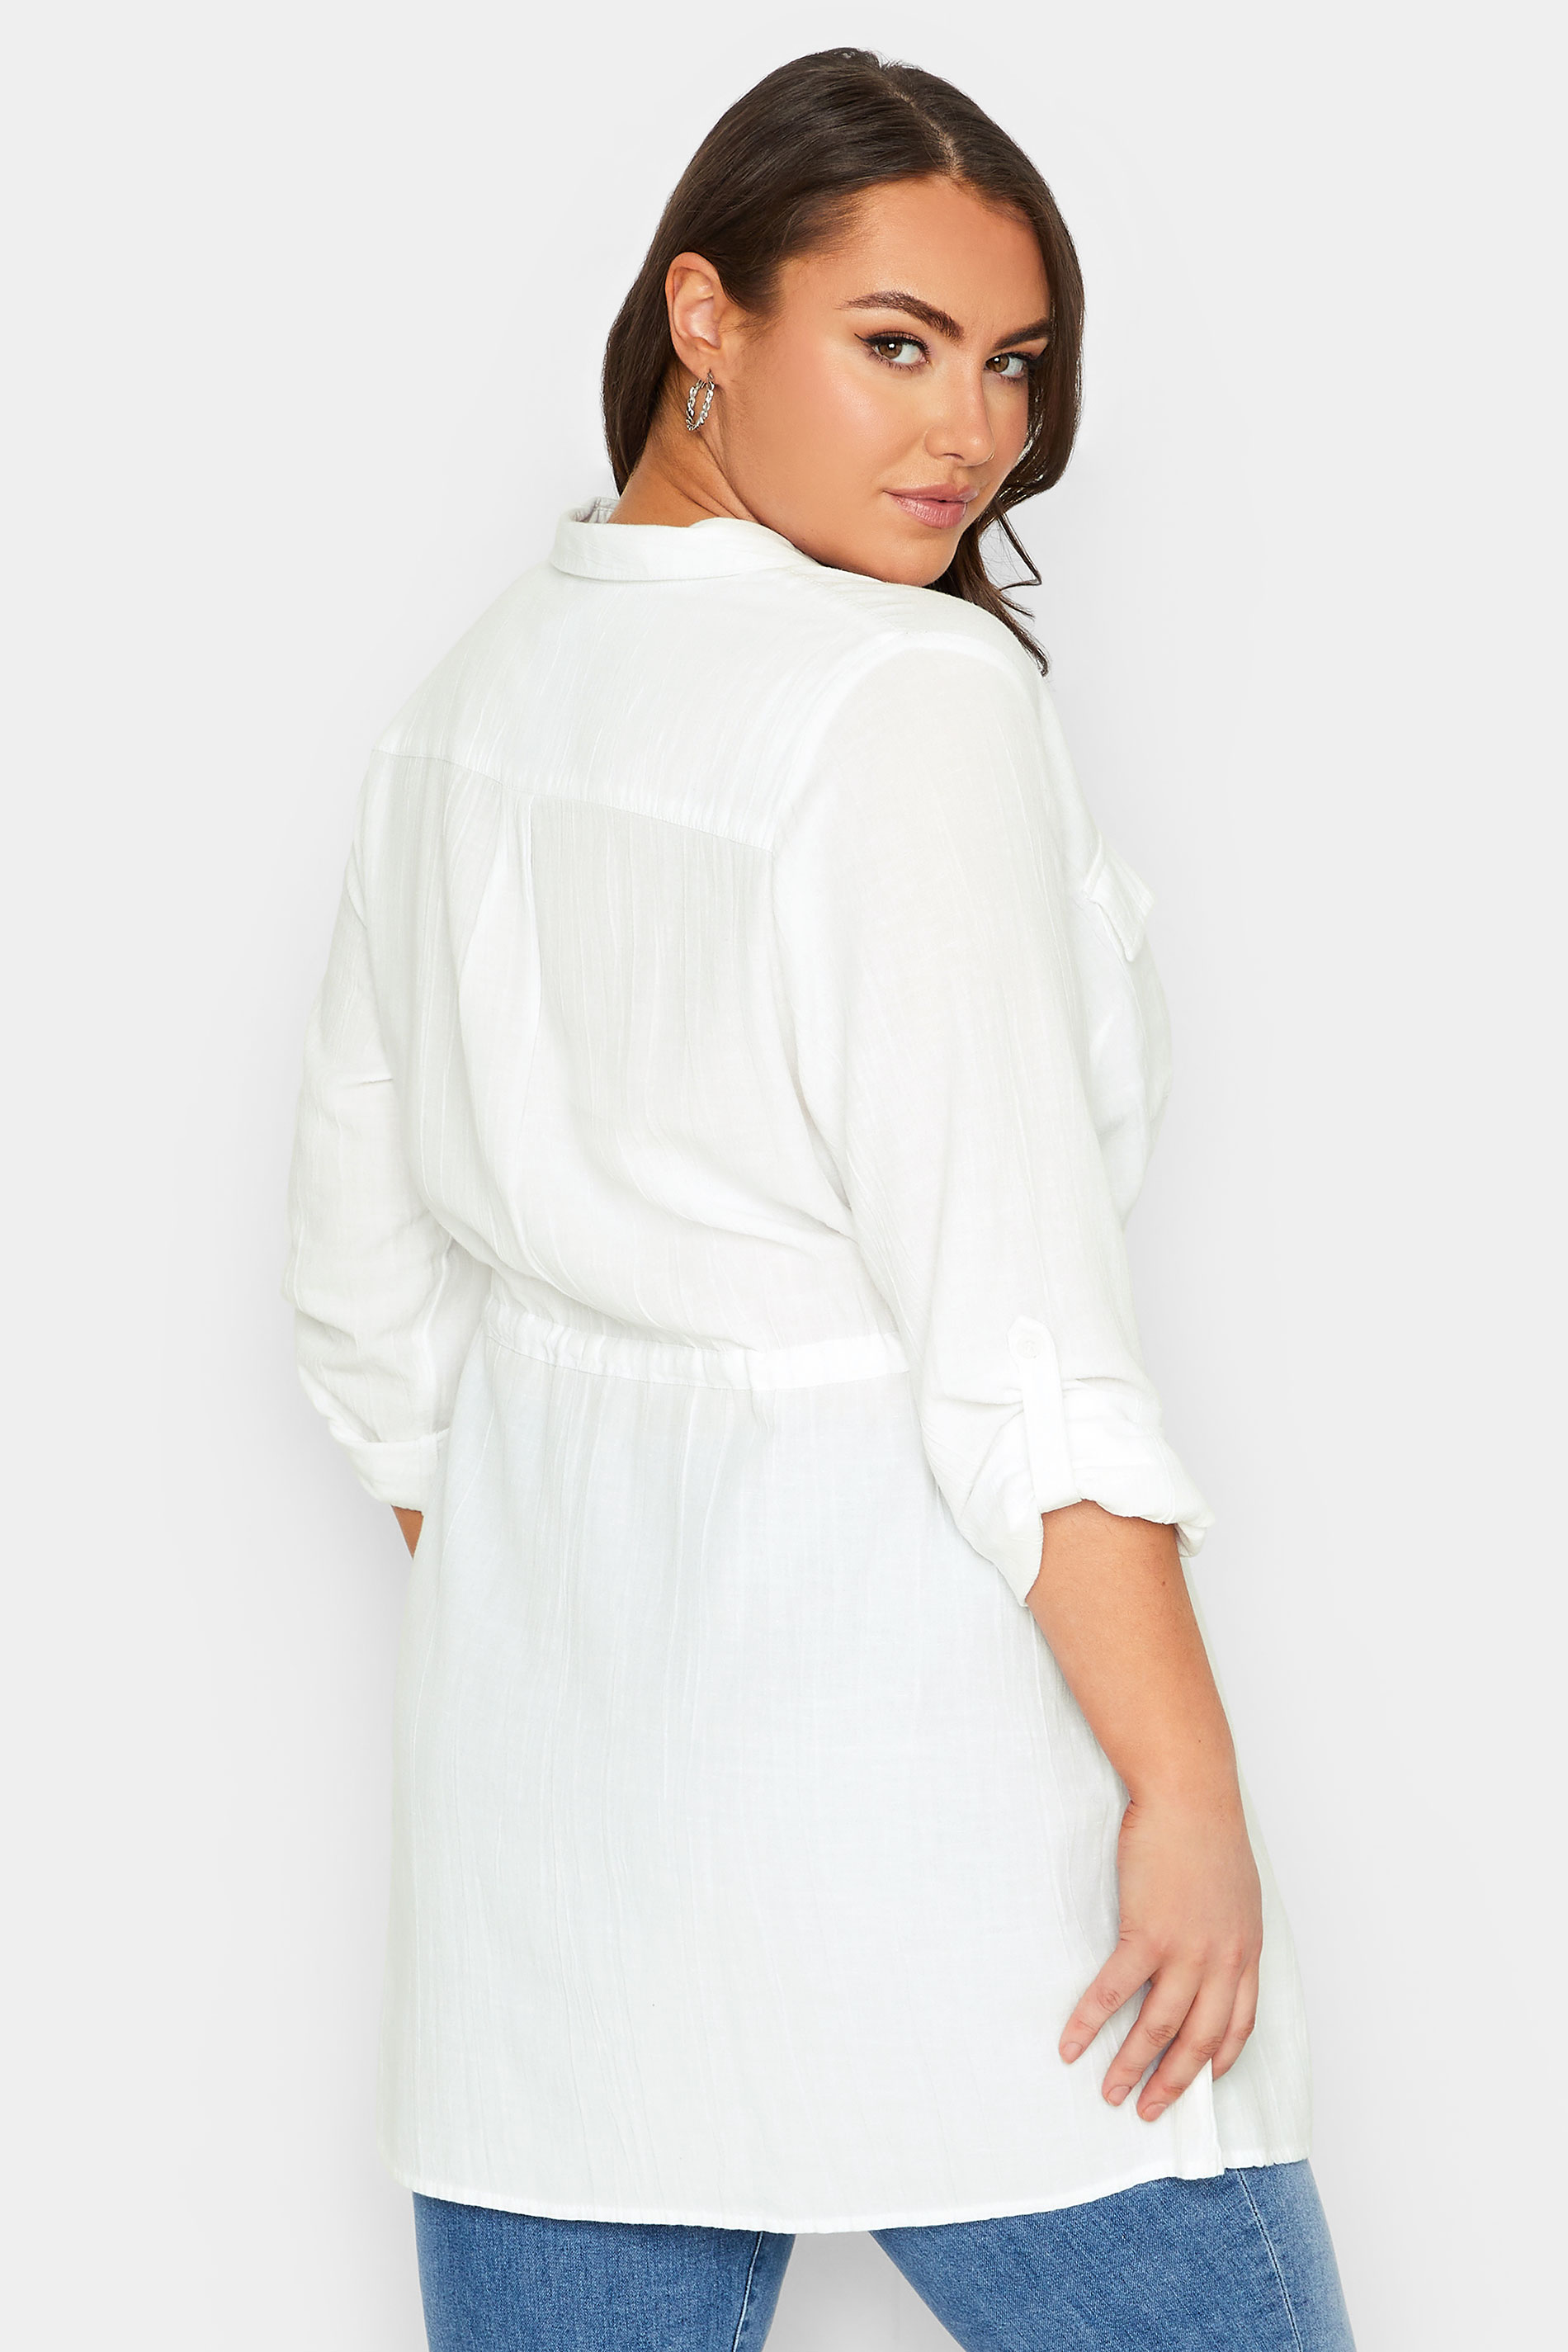 YOURS Curve White Utility Tunic Linen Shirt | Yours Clothing  3